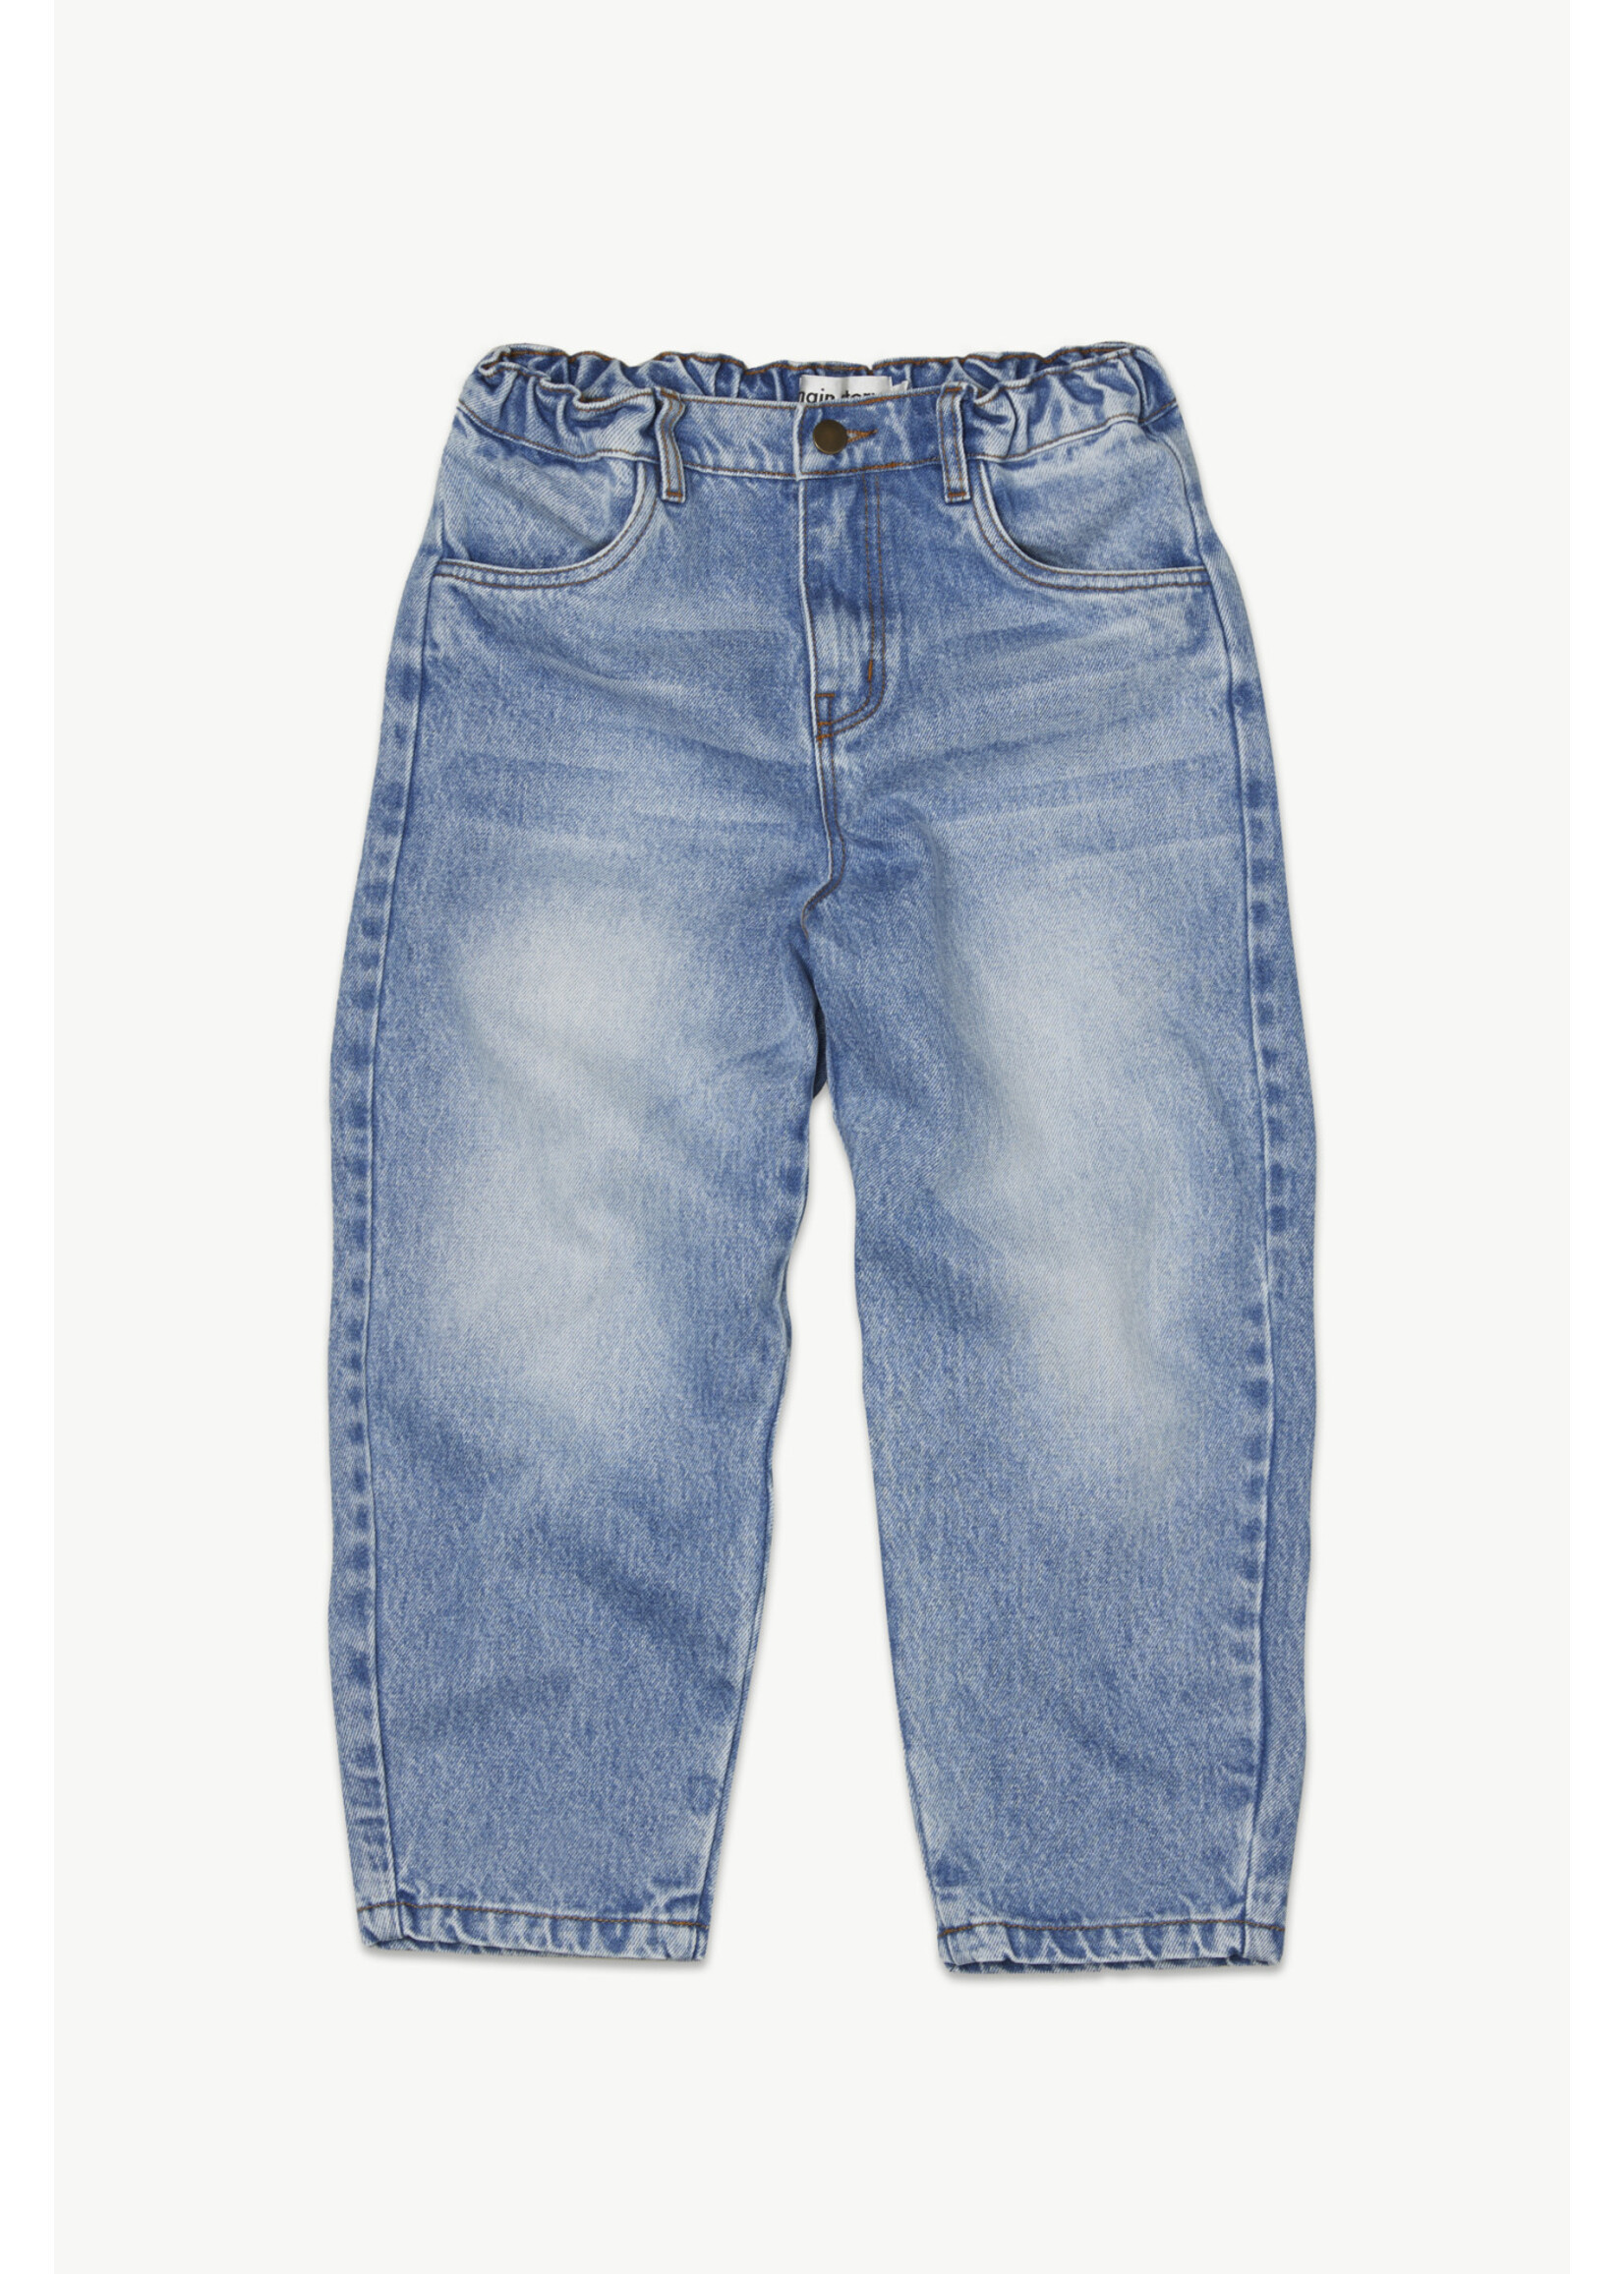 Main Story Main Story Tapered Jeans Blue